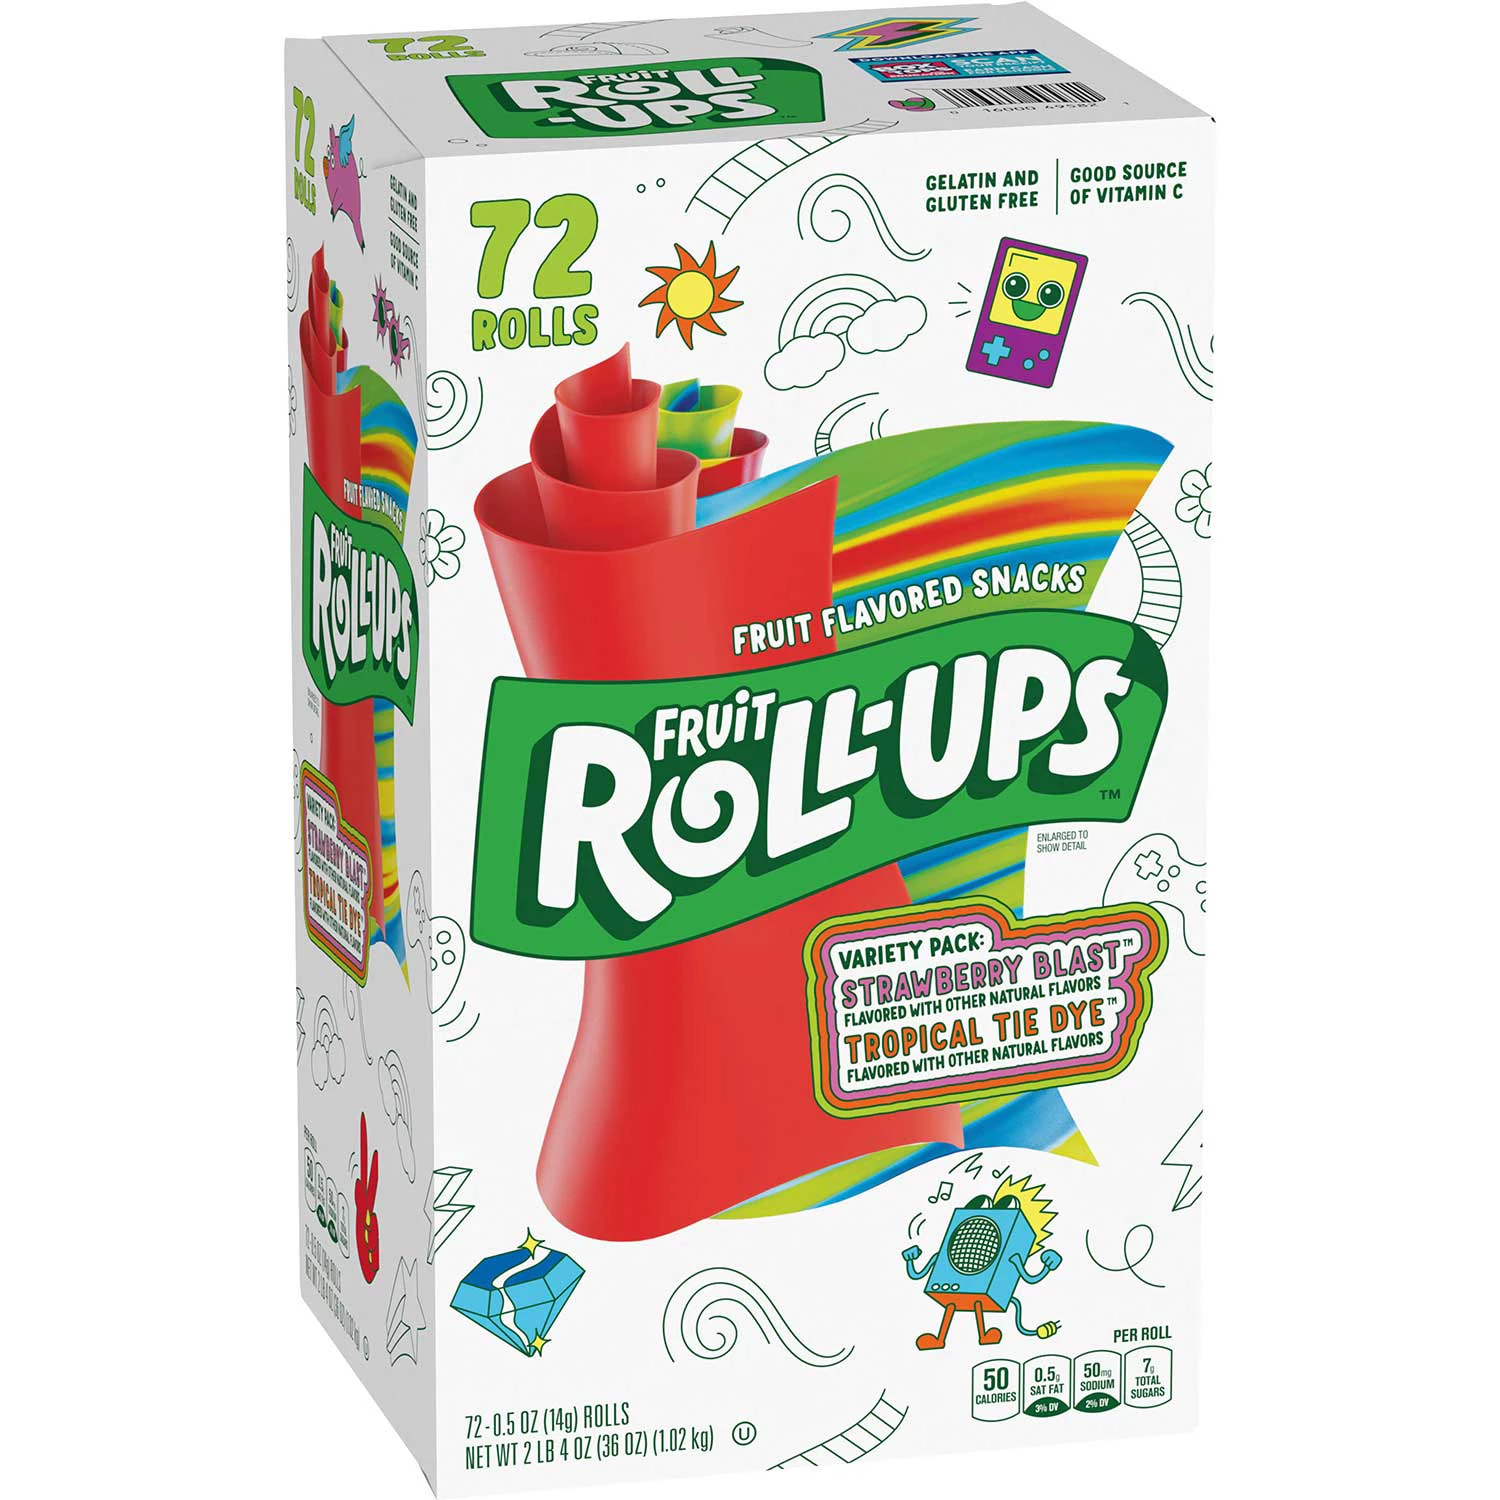 Fruit Roll-Ups Variety Pack (0.5 oz., 72 ct.)